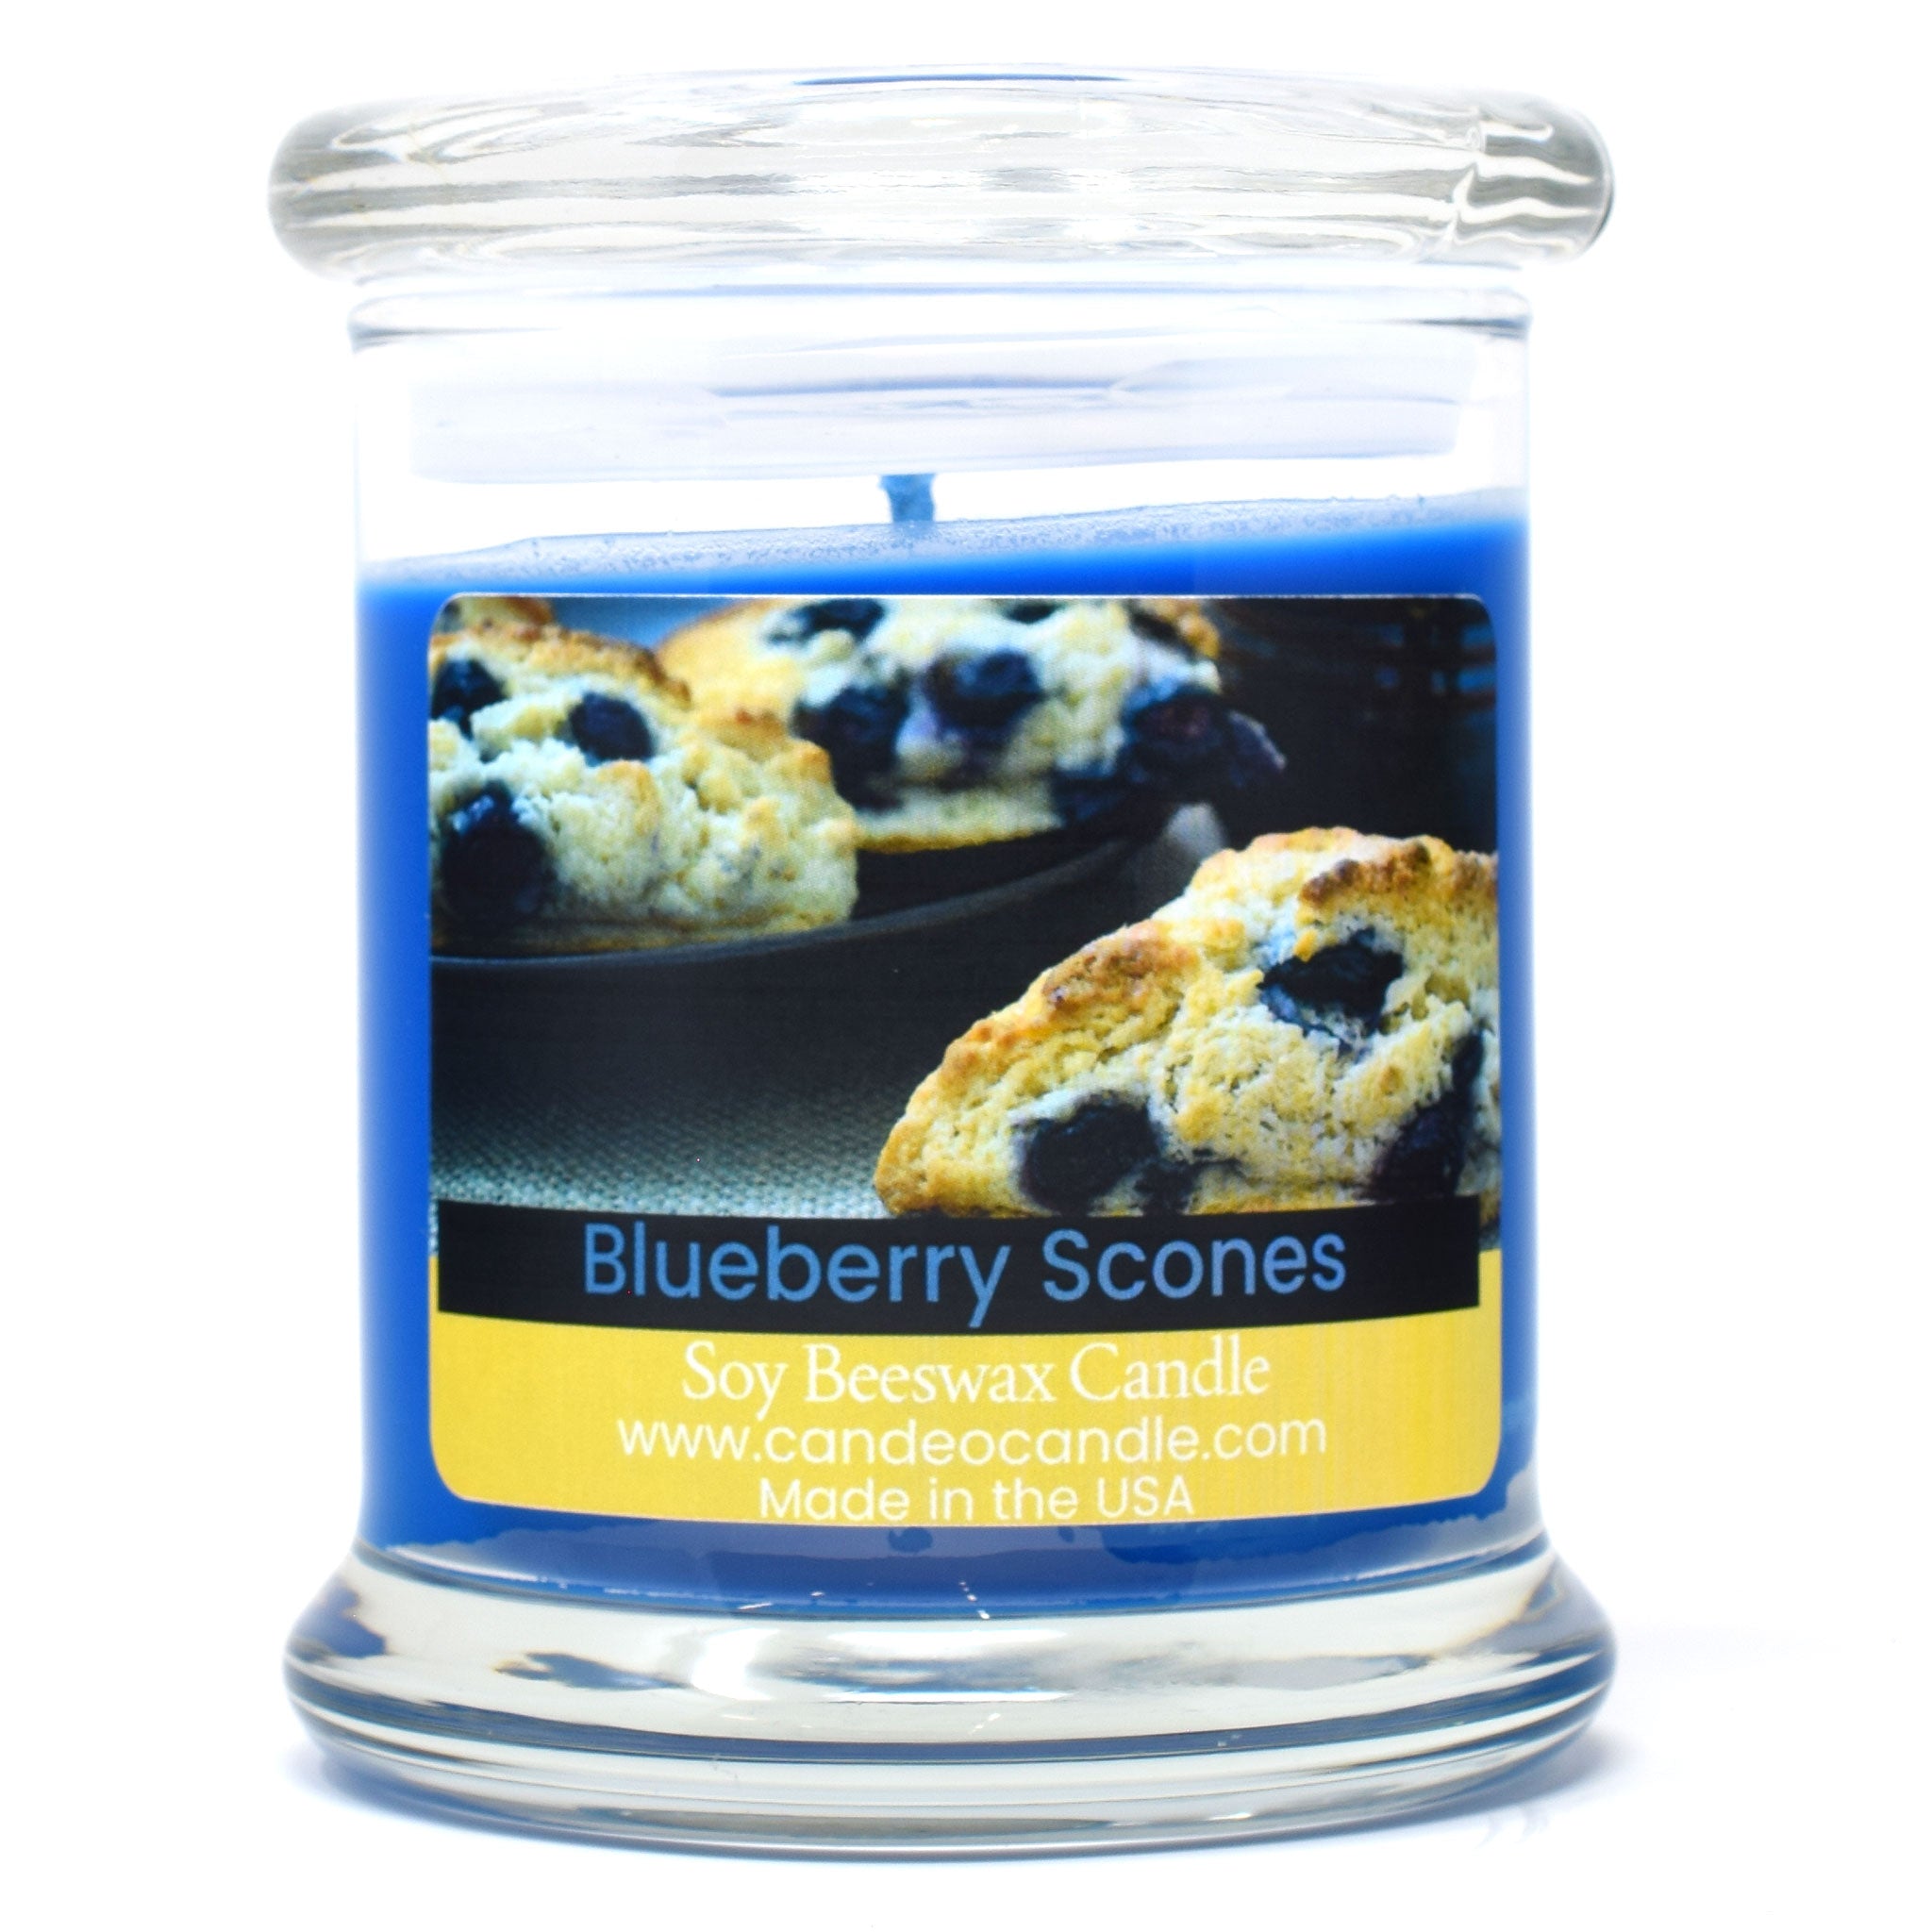 Blueberry Scones, 9oz Soy Candle Jar - Candeo Candle